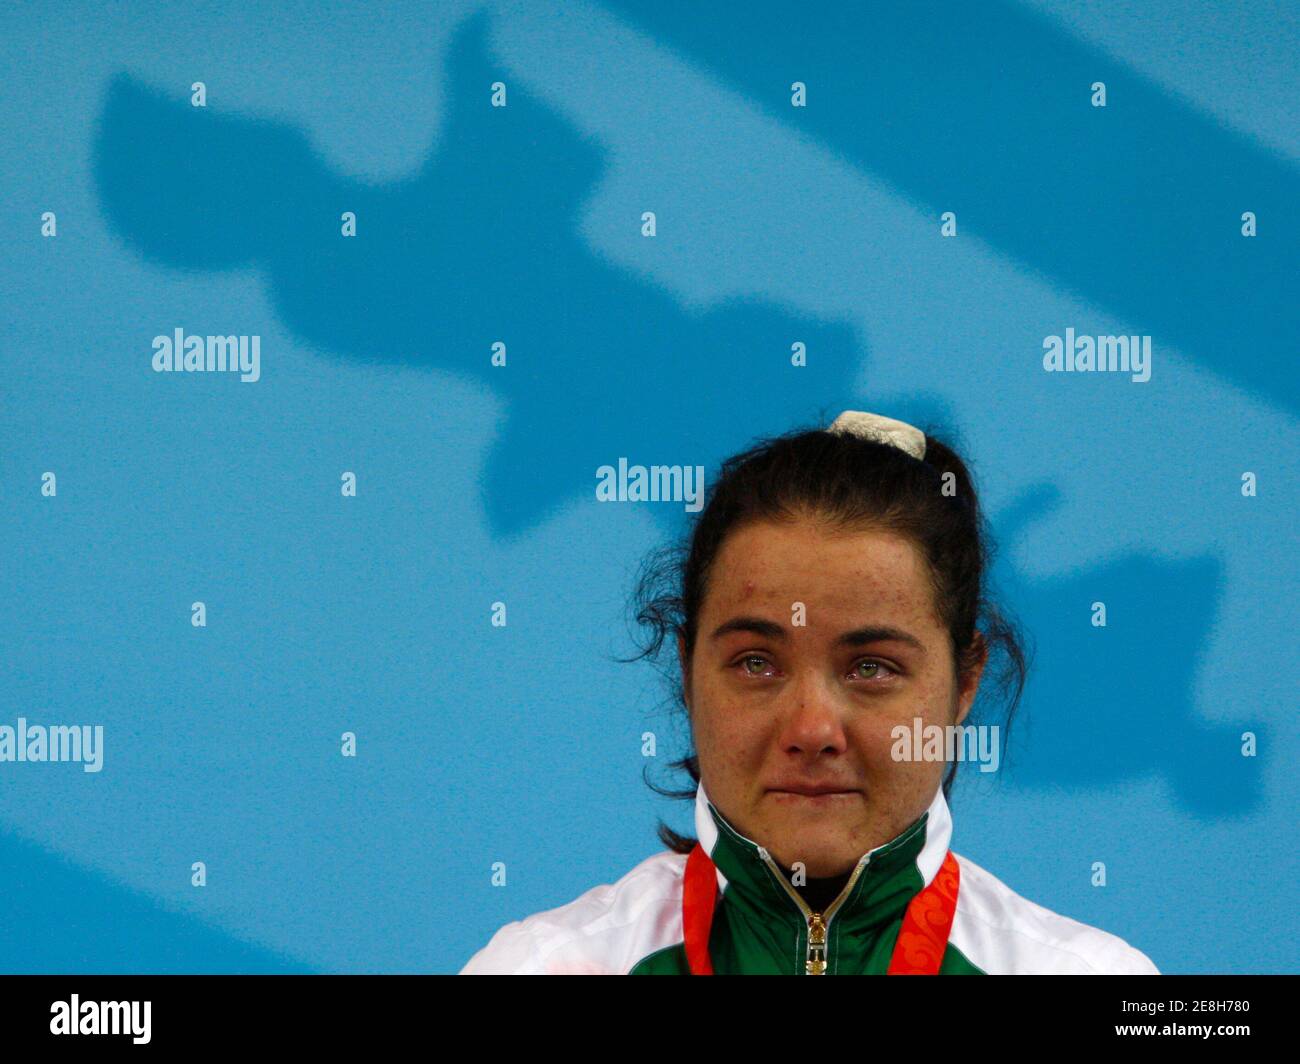 Bronze medallist Nastassia Novikava of Belarus reacts during the medal ceremony for the women's 53kg weightlifting competition at the Beijing 2008 Olympic Games August 10, 2008.     REUTERS/Oleg Popov (CHINA) Stock Photo